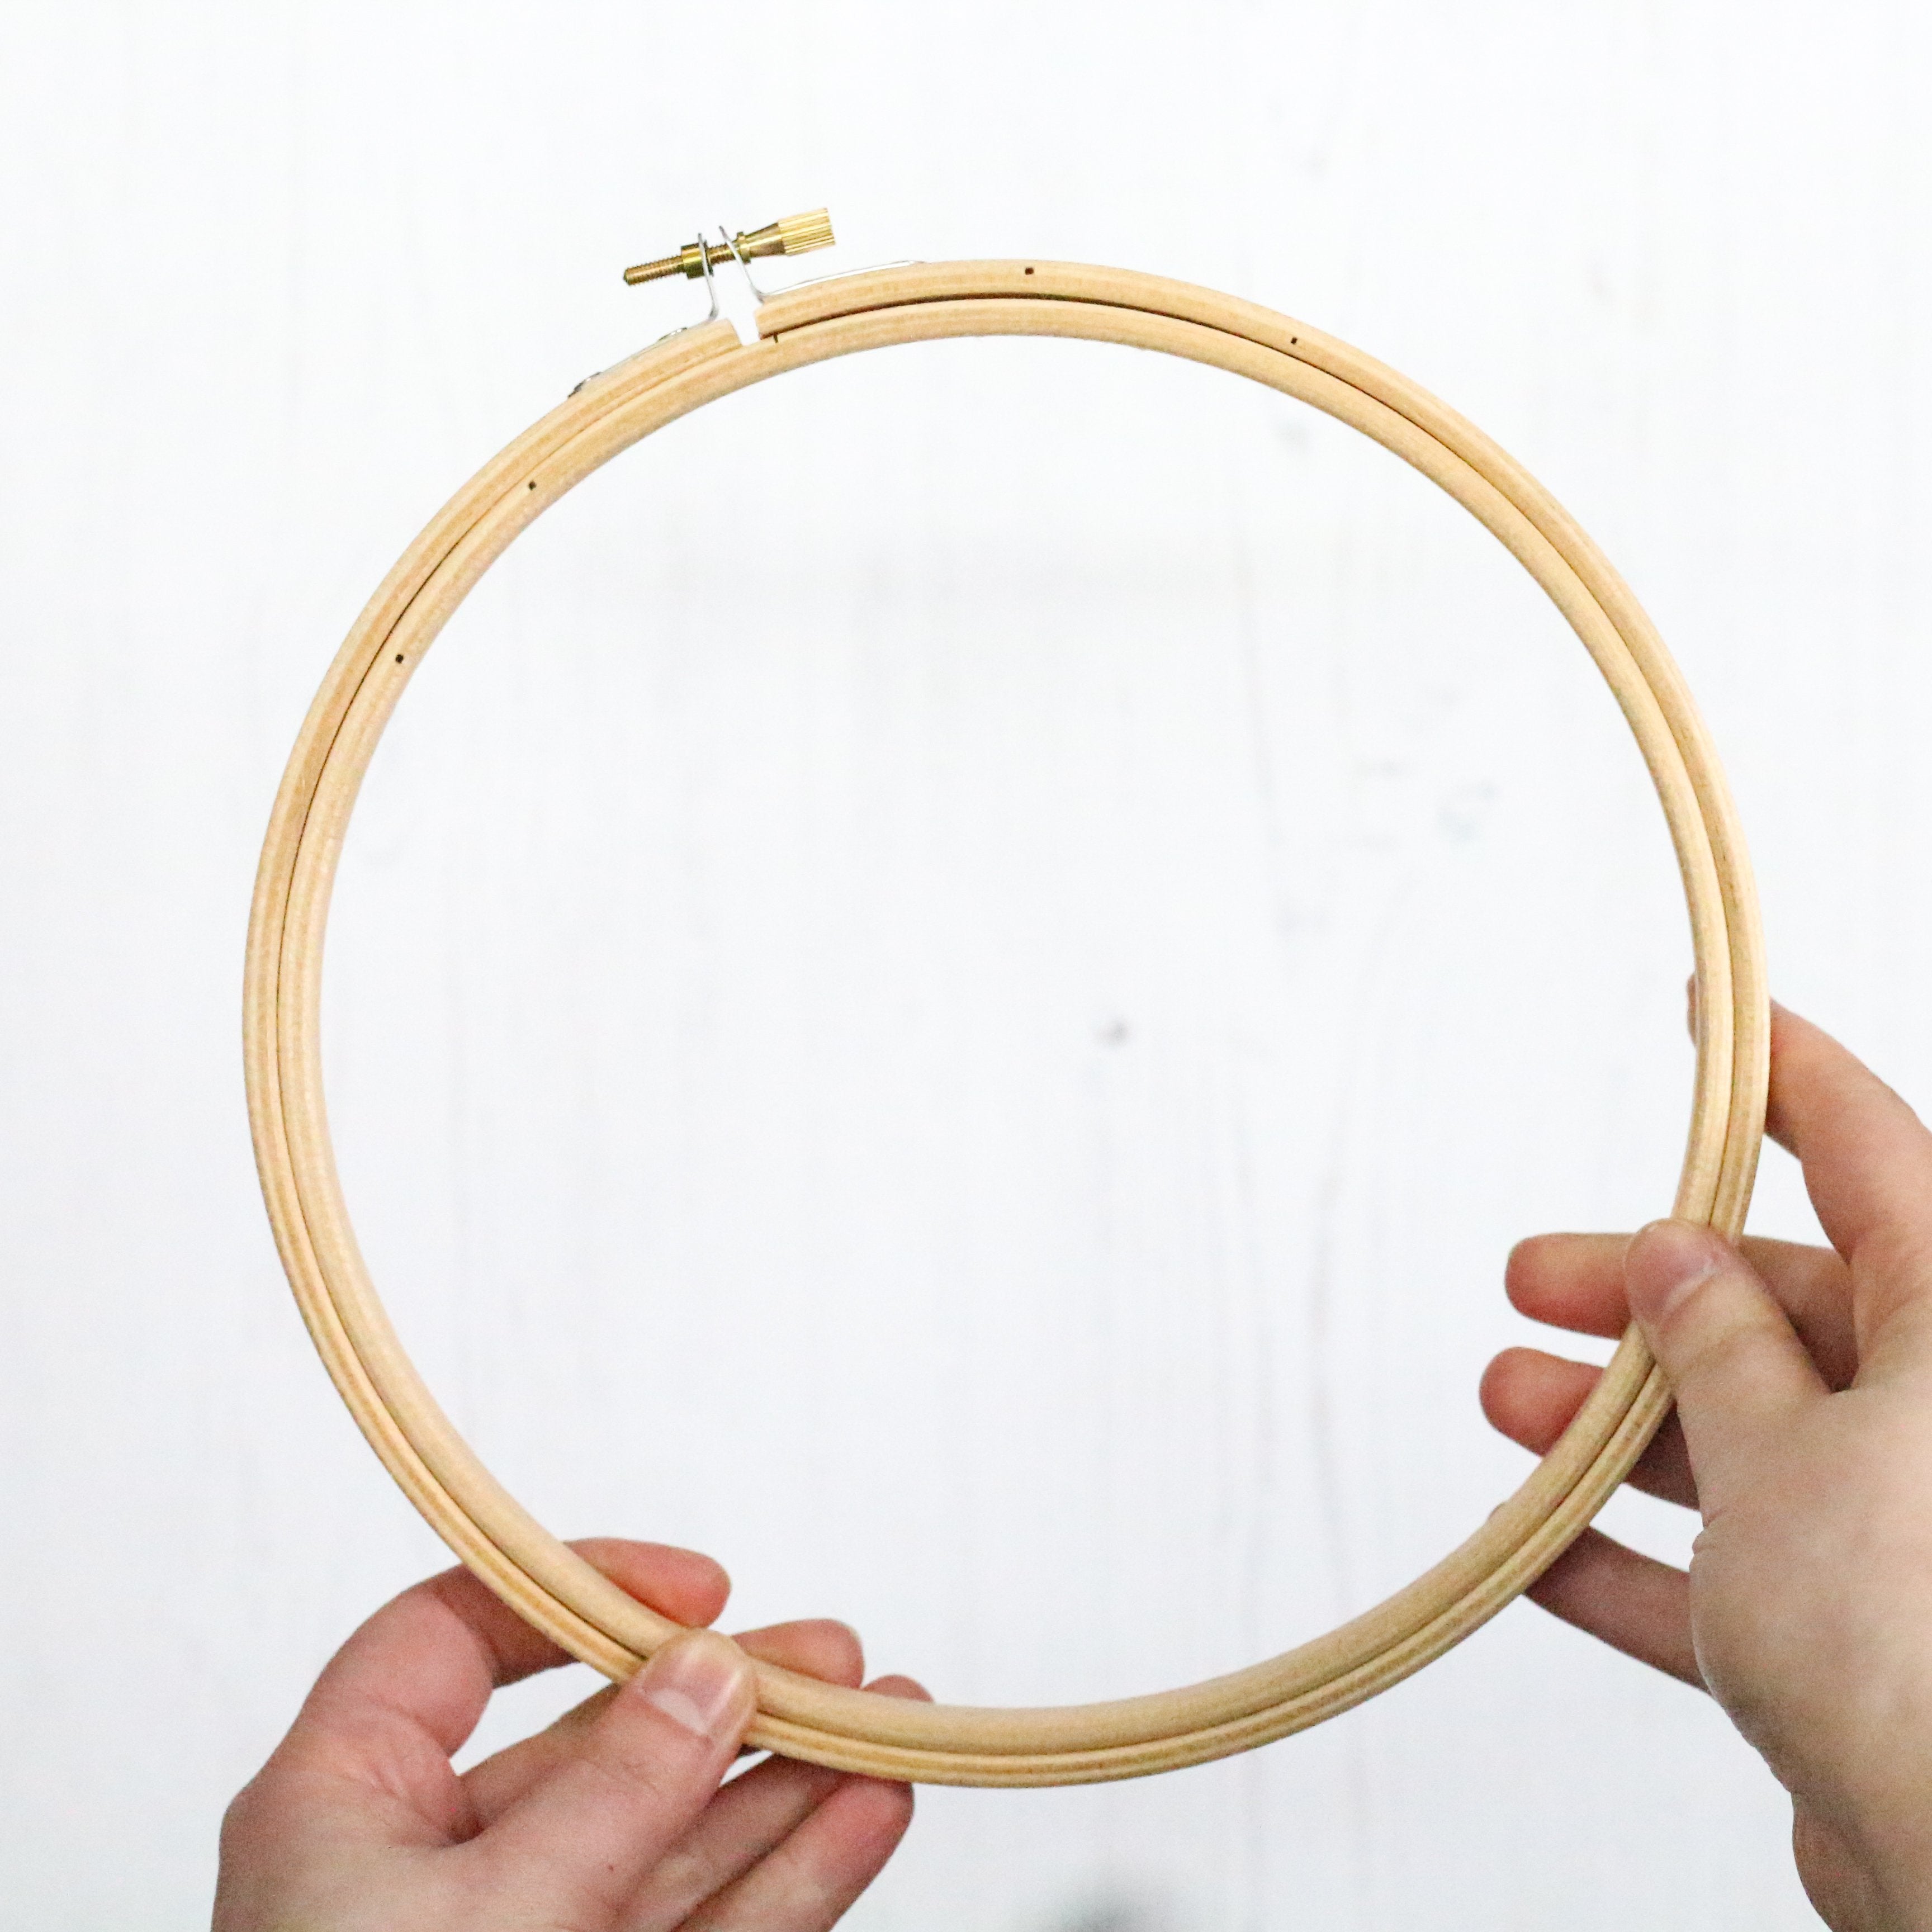 Beech Wood Embroidery Hoops - Choose your size – Lolli and Grace